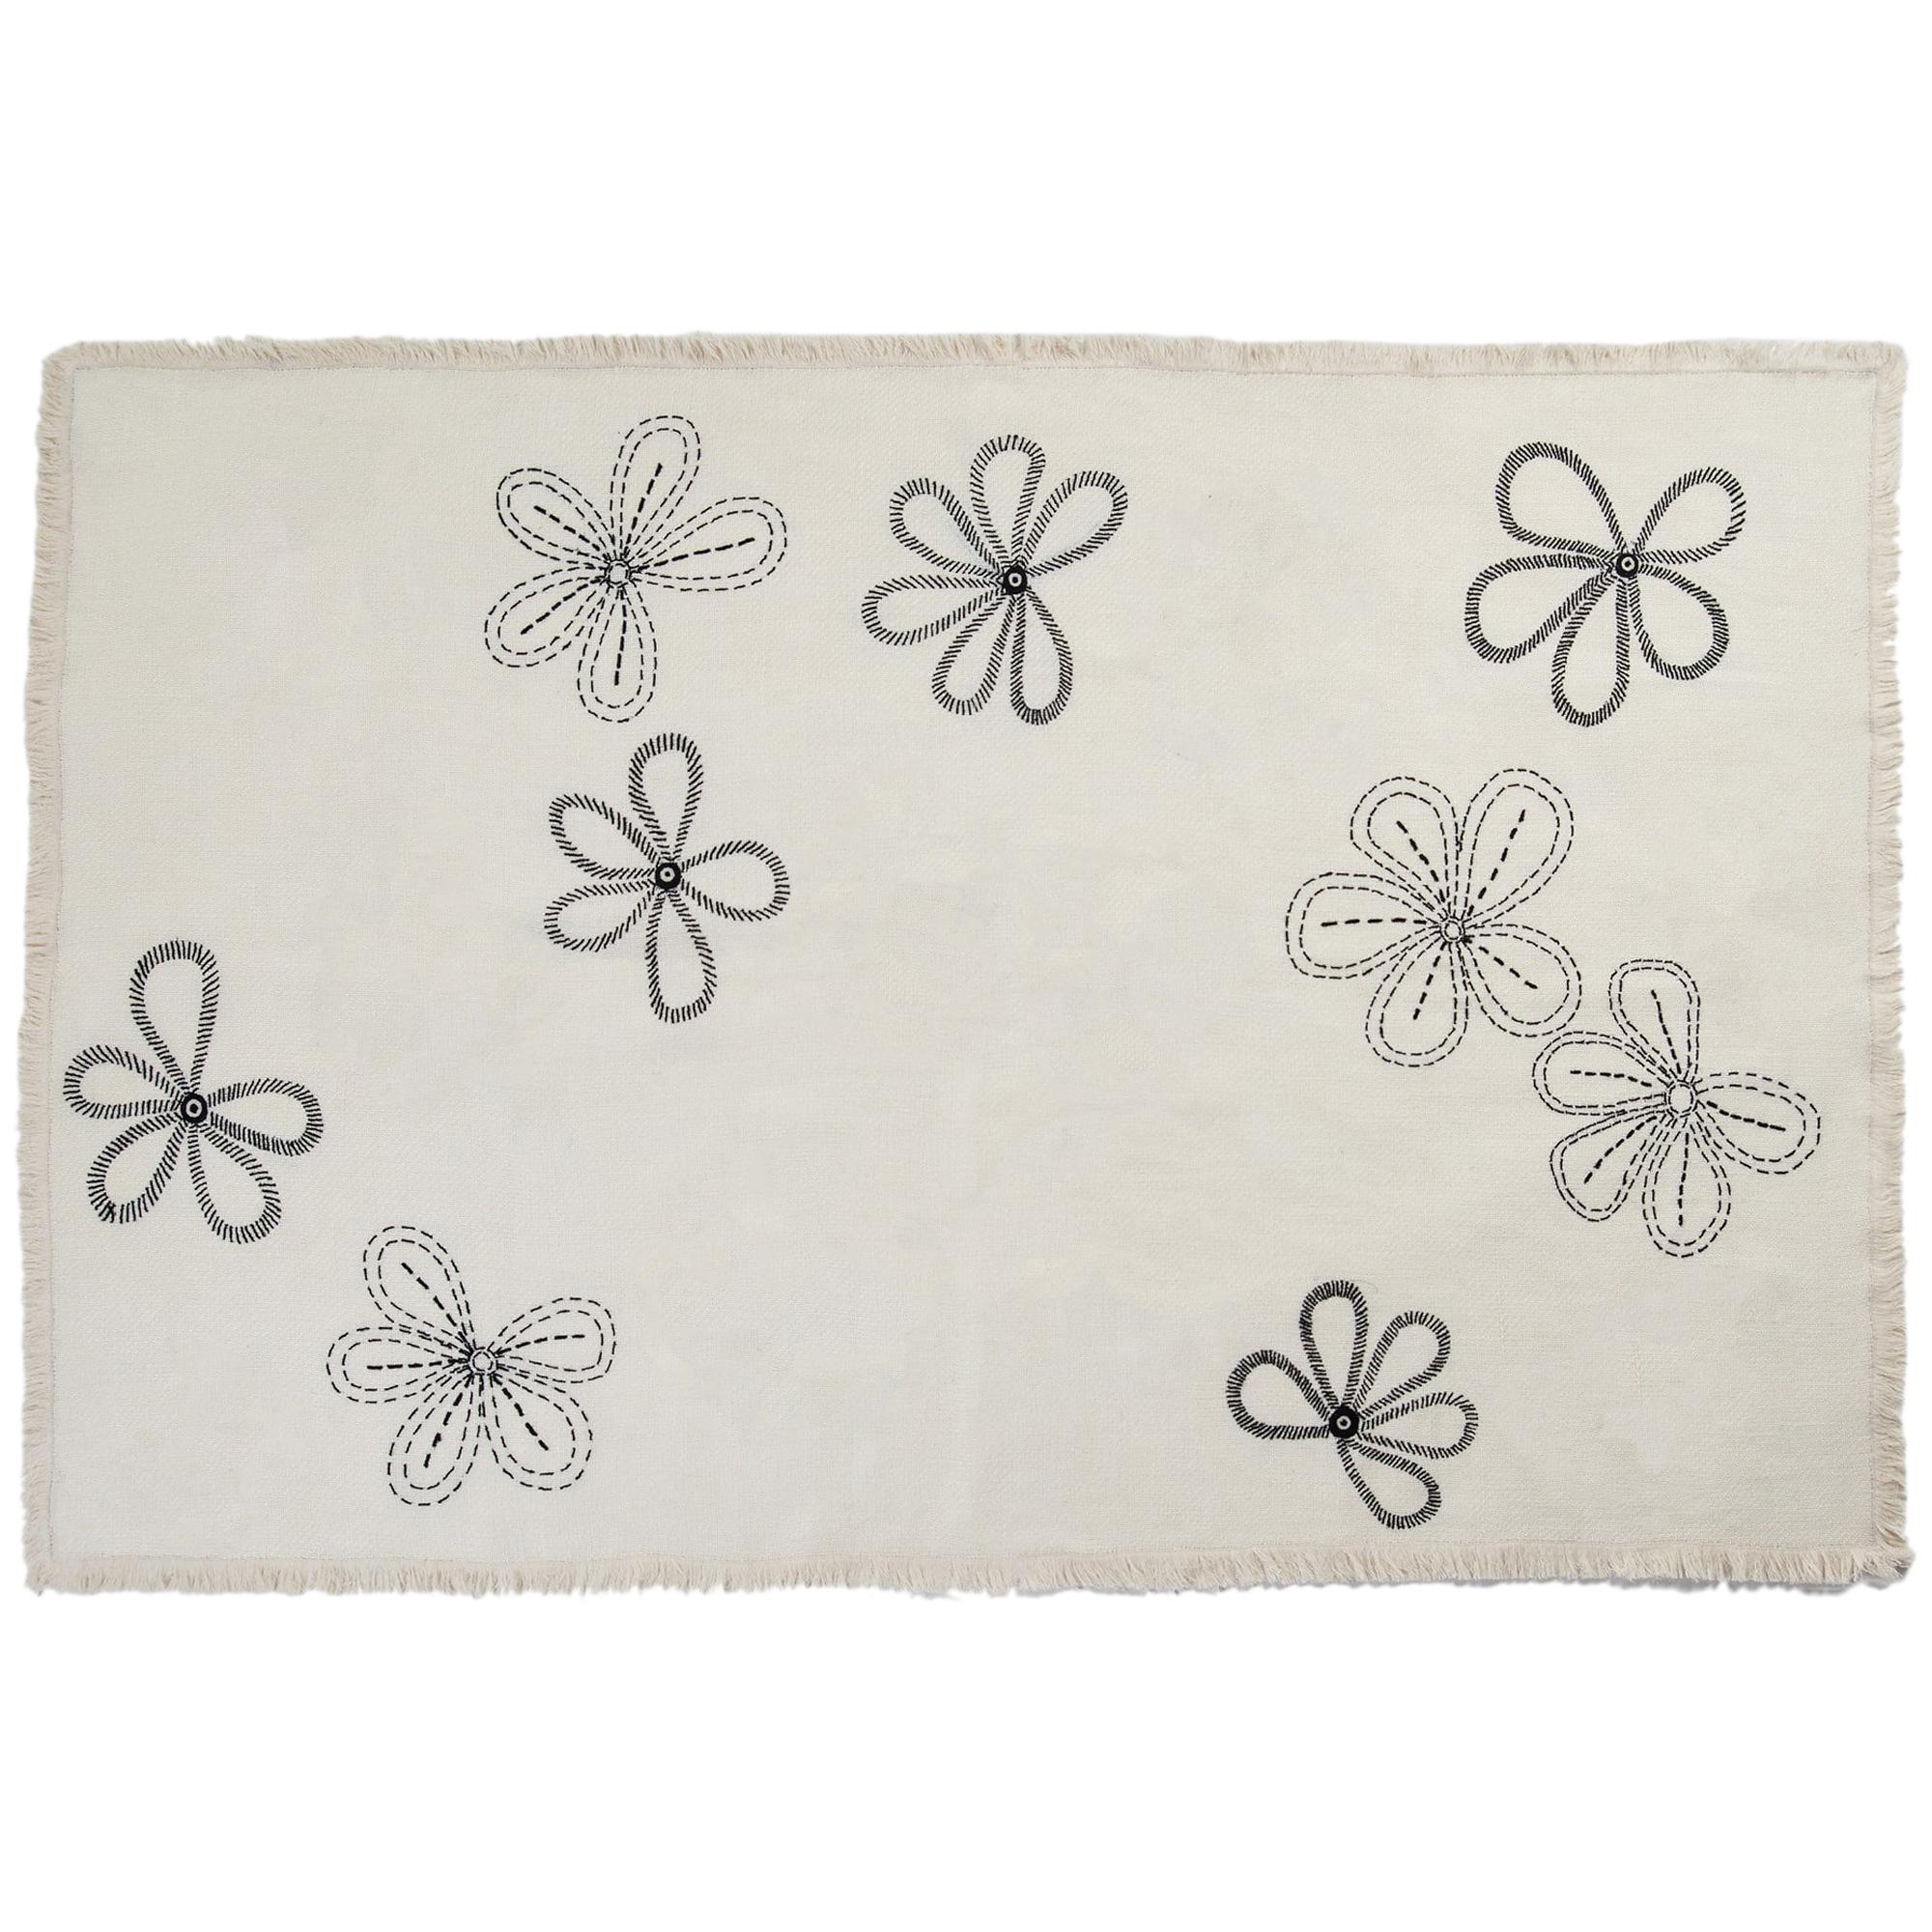 SOMERSET S. Hand Embroidered Off-White Throw Blanket